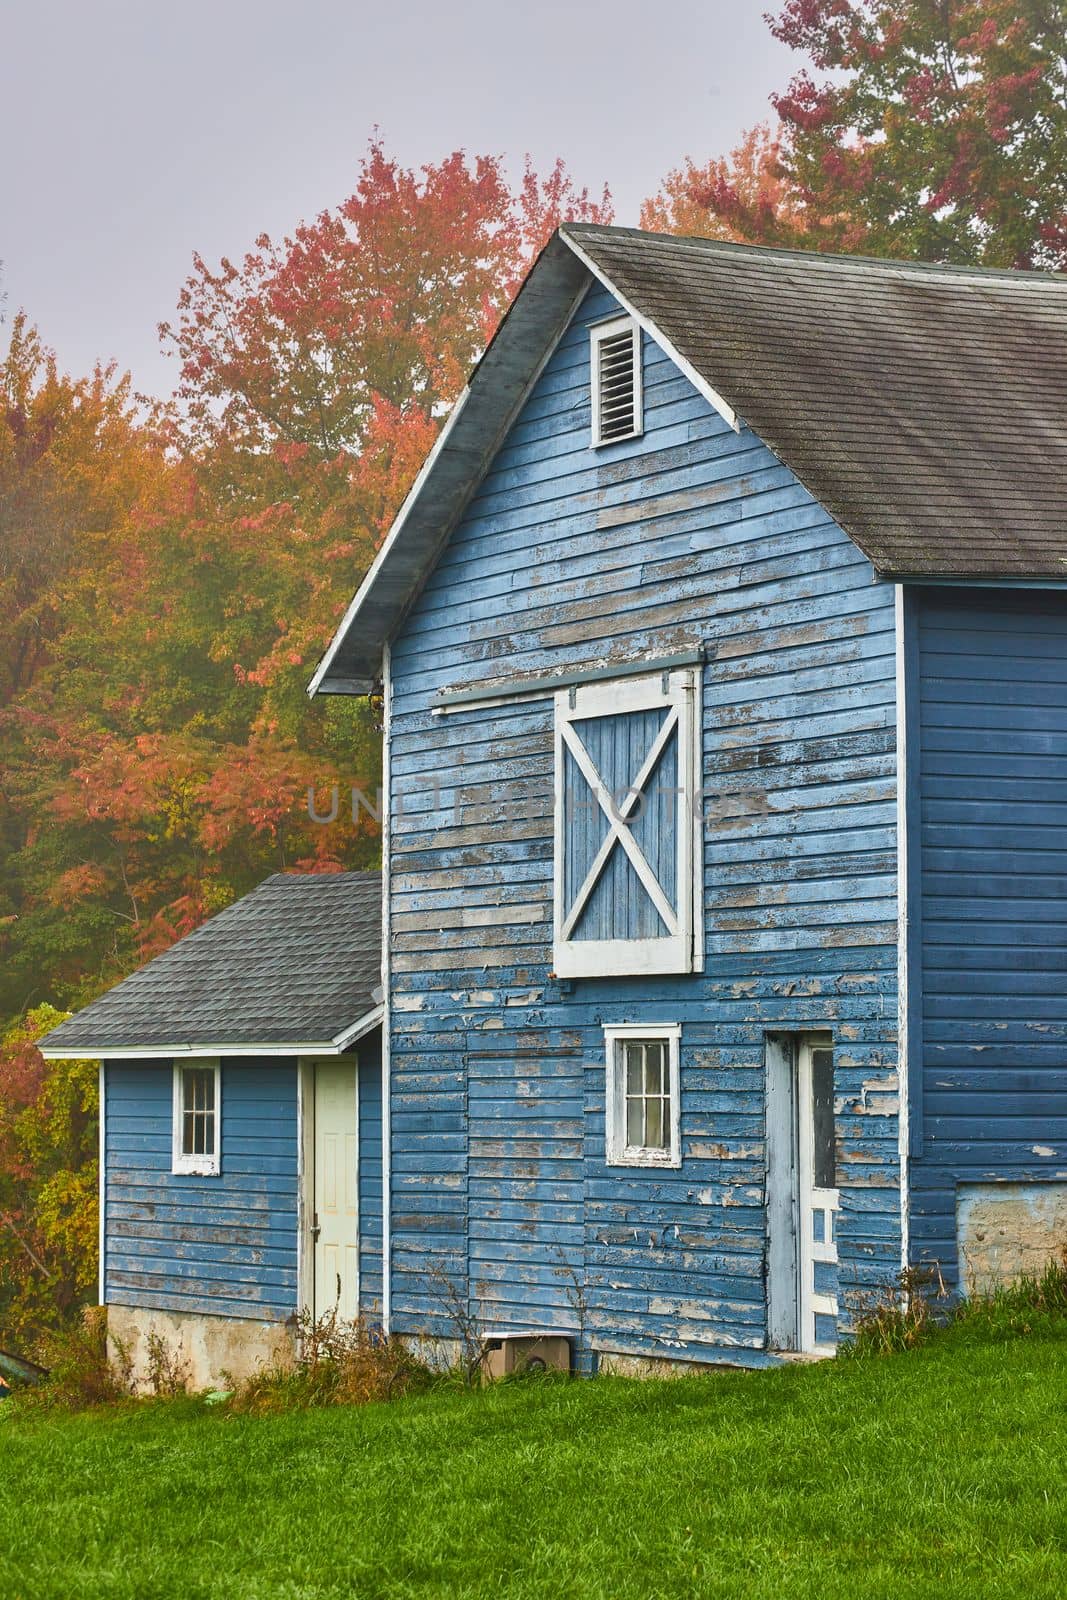 Image of Blue fading peeling barn or shed detail against colorful fall forest